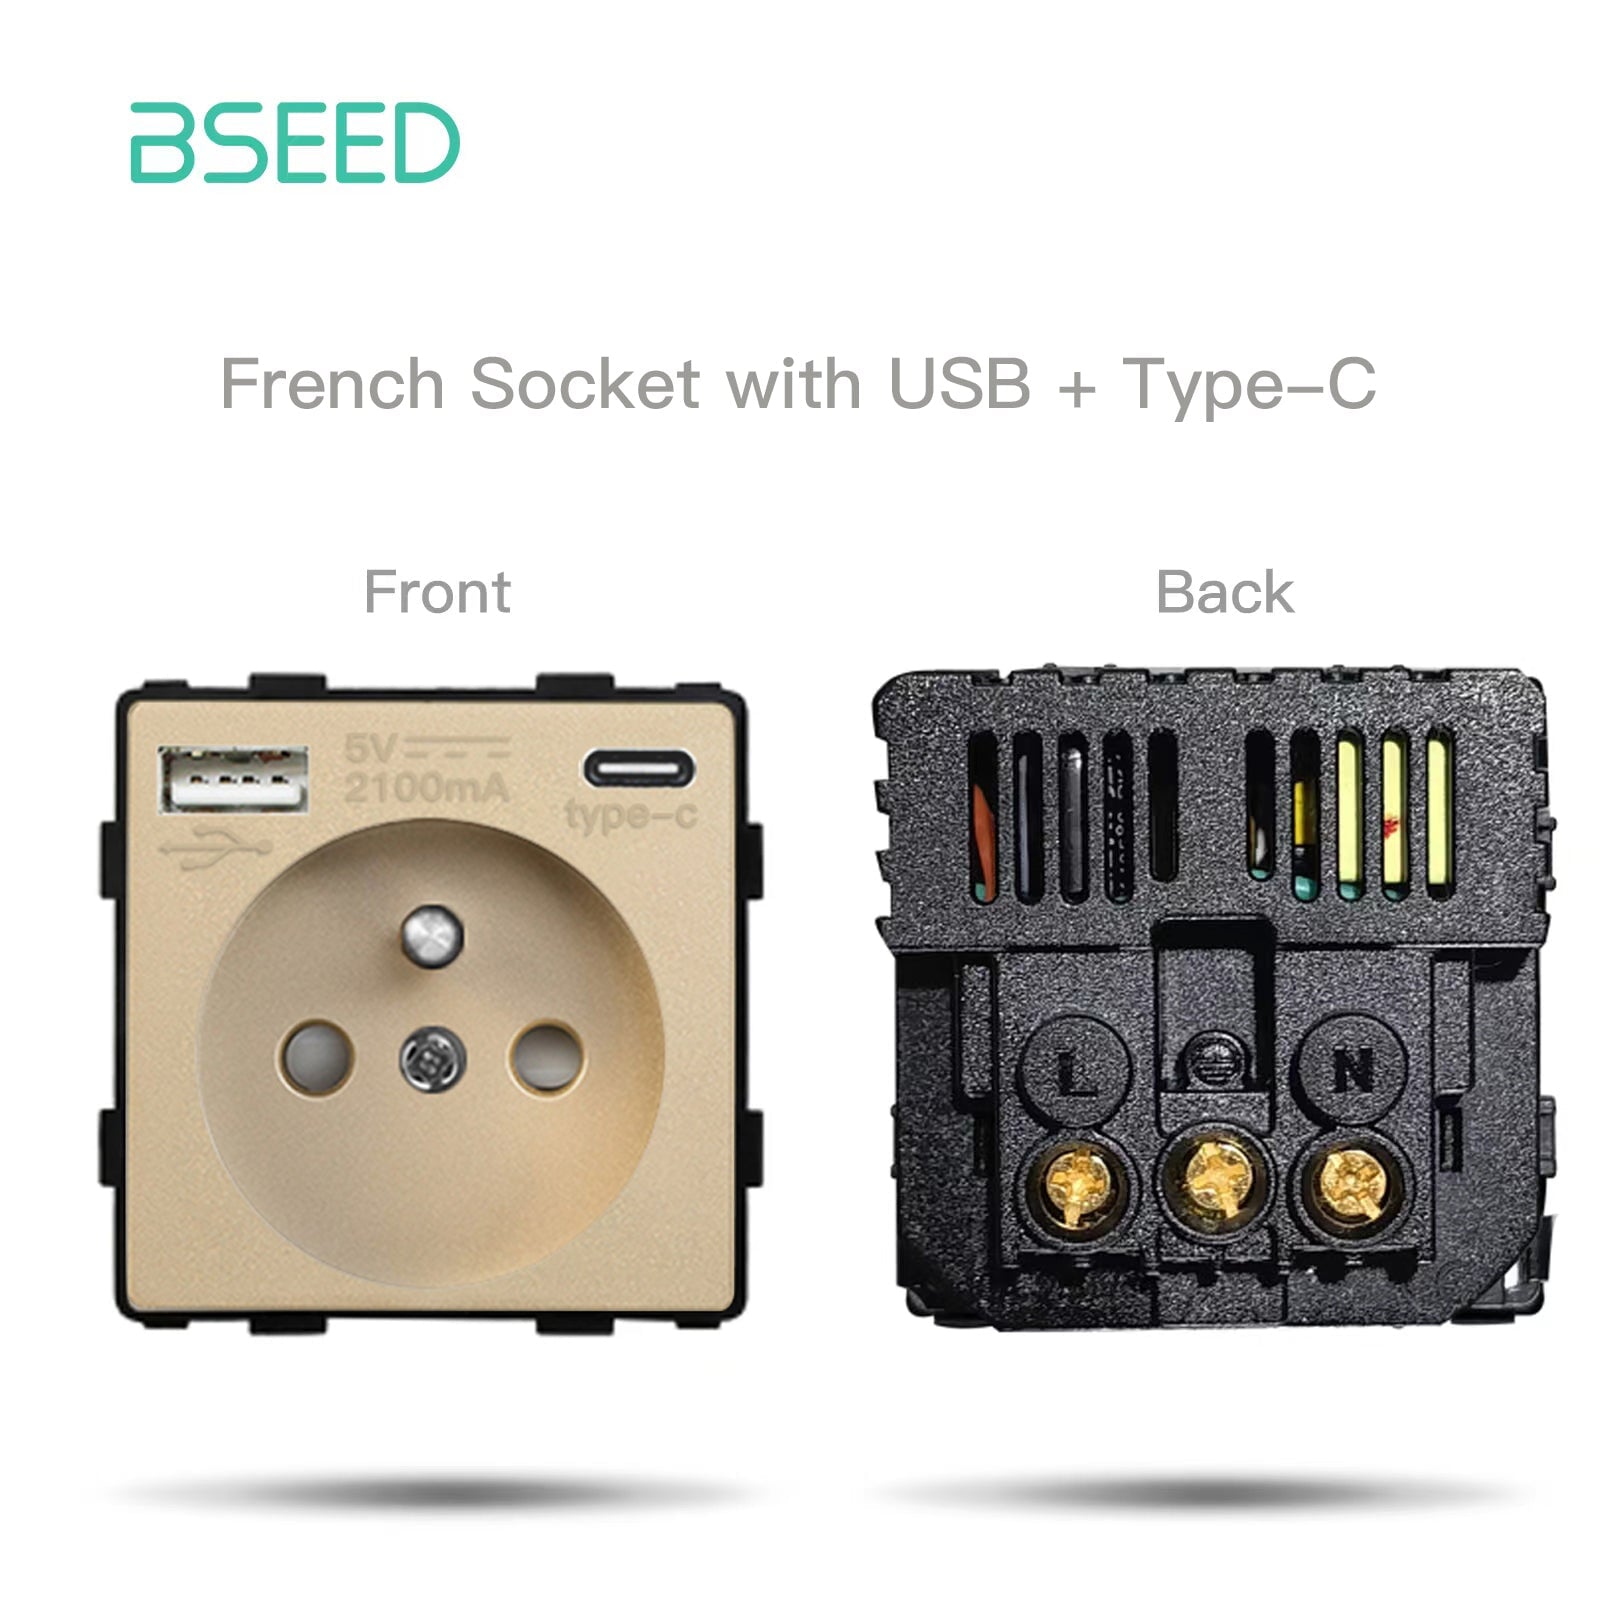 BSEED French Type-C Interface Outlet Wall Socket 16A USB Charge Power Outlets & Sockets Bseedswitch Gold 